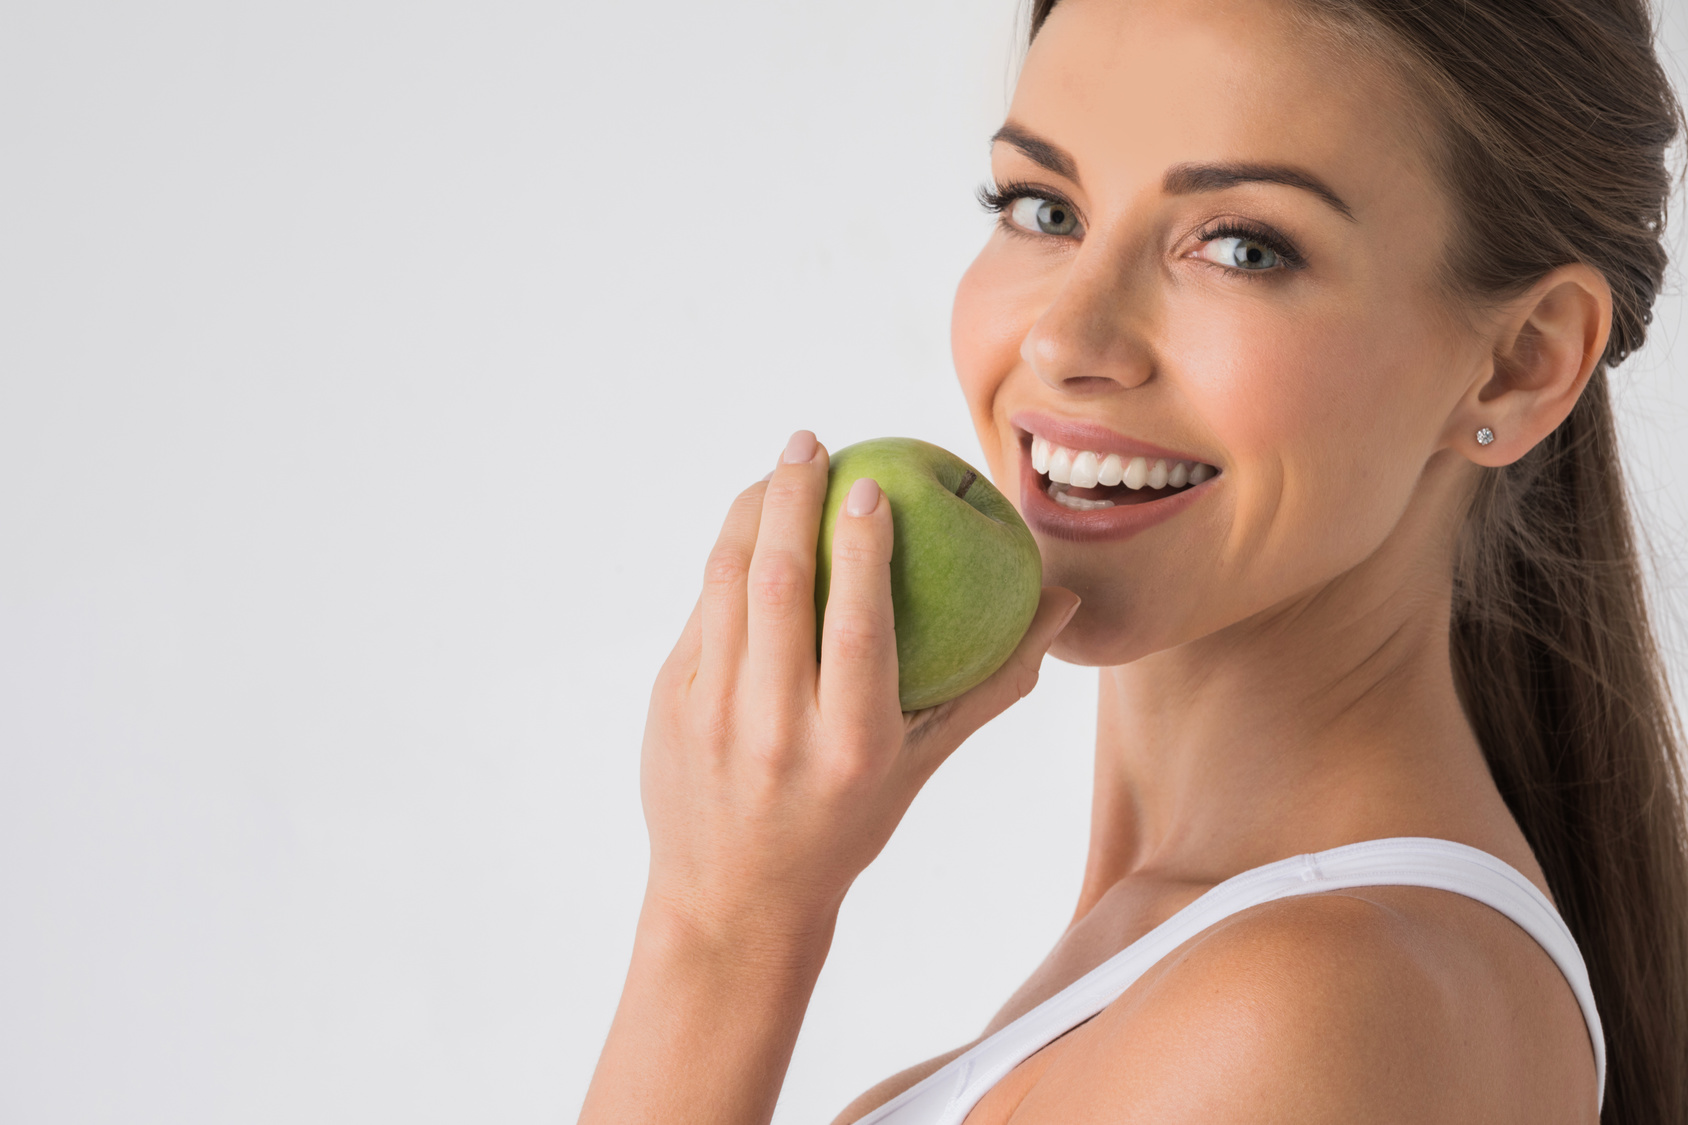 Young woman with healthy teeth smiling and biting green apple